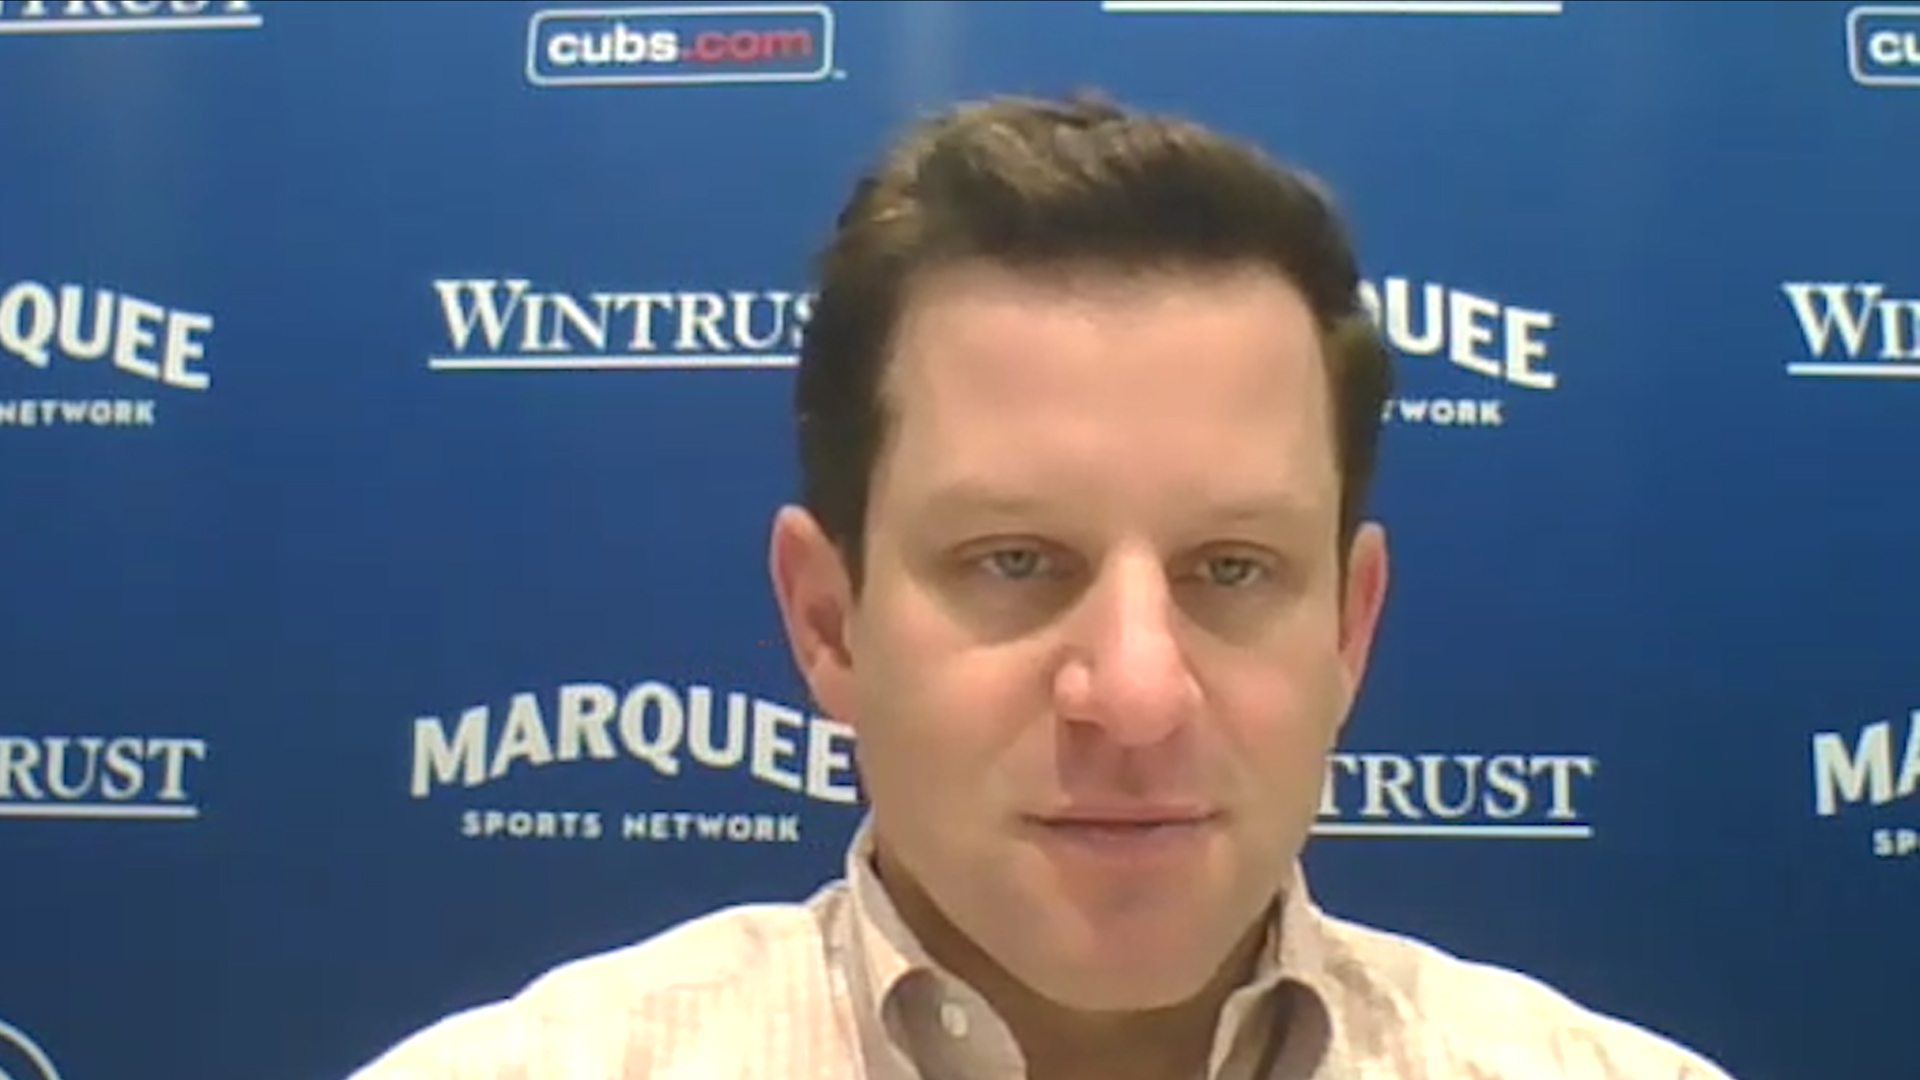 Patrick Wisdom Enjoying Moment With Cubs Slide - Marquee Sports